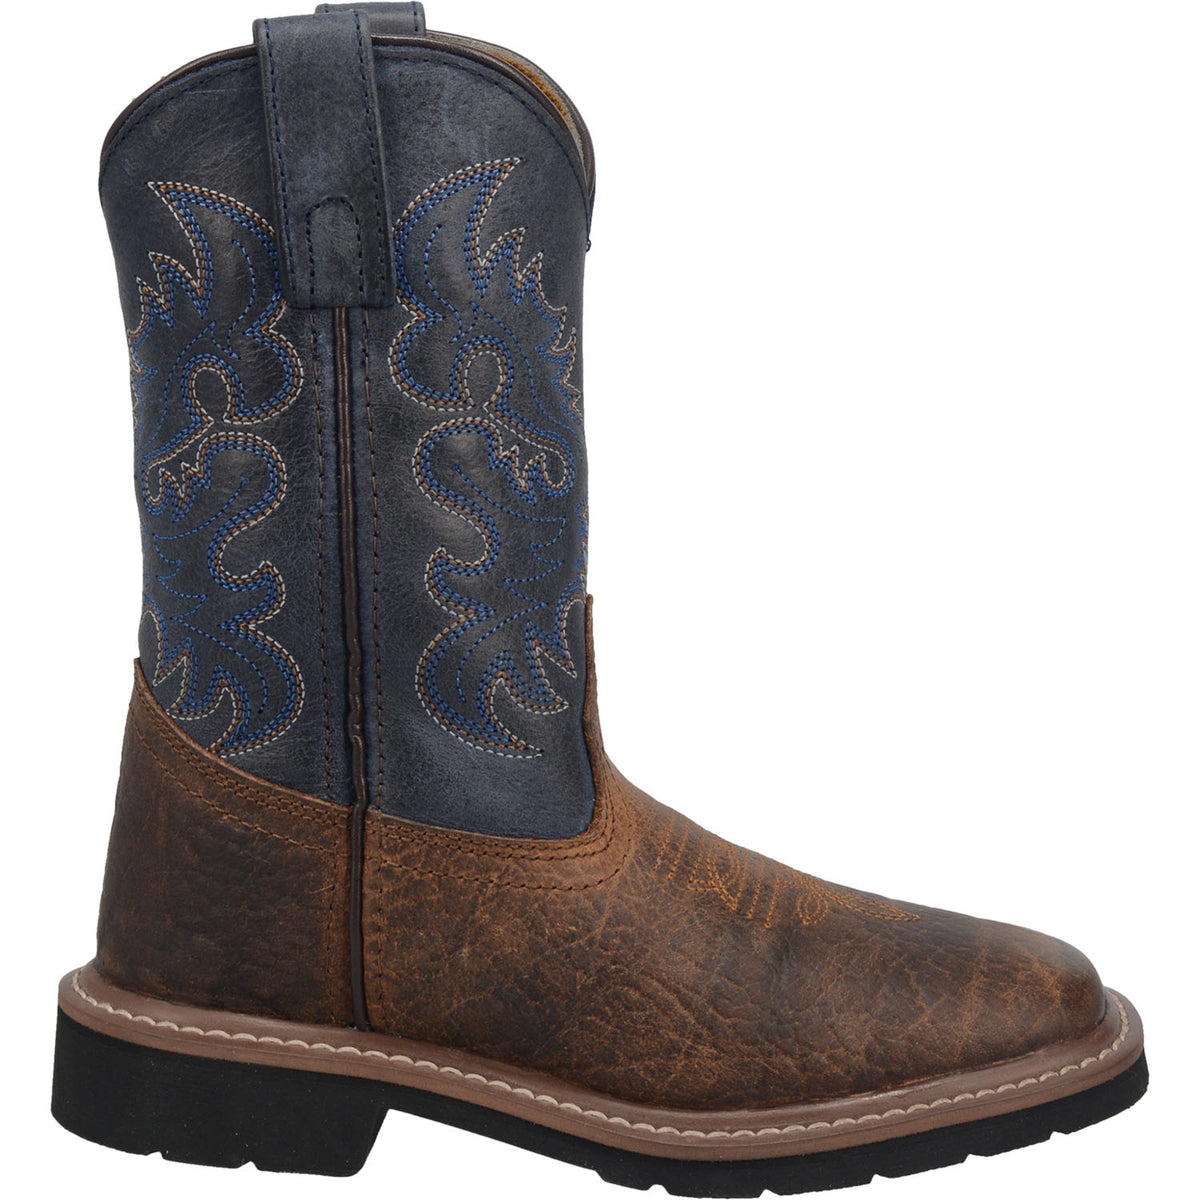 BRANTLEY LEATHER YOUTH BOOT Cover